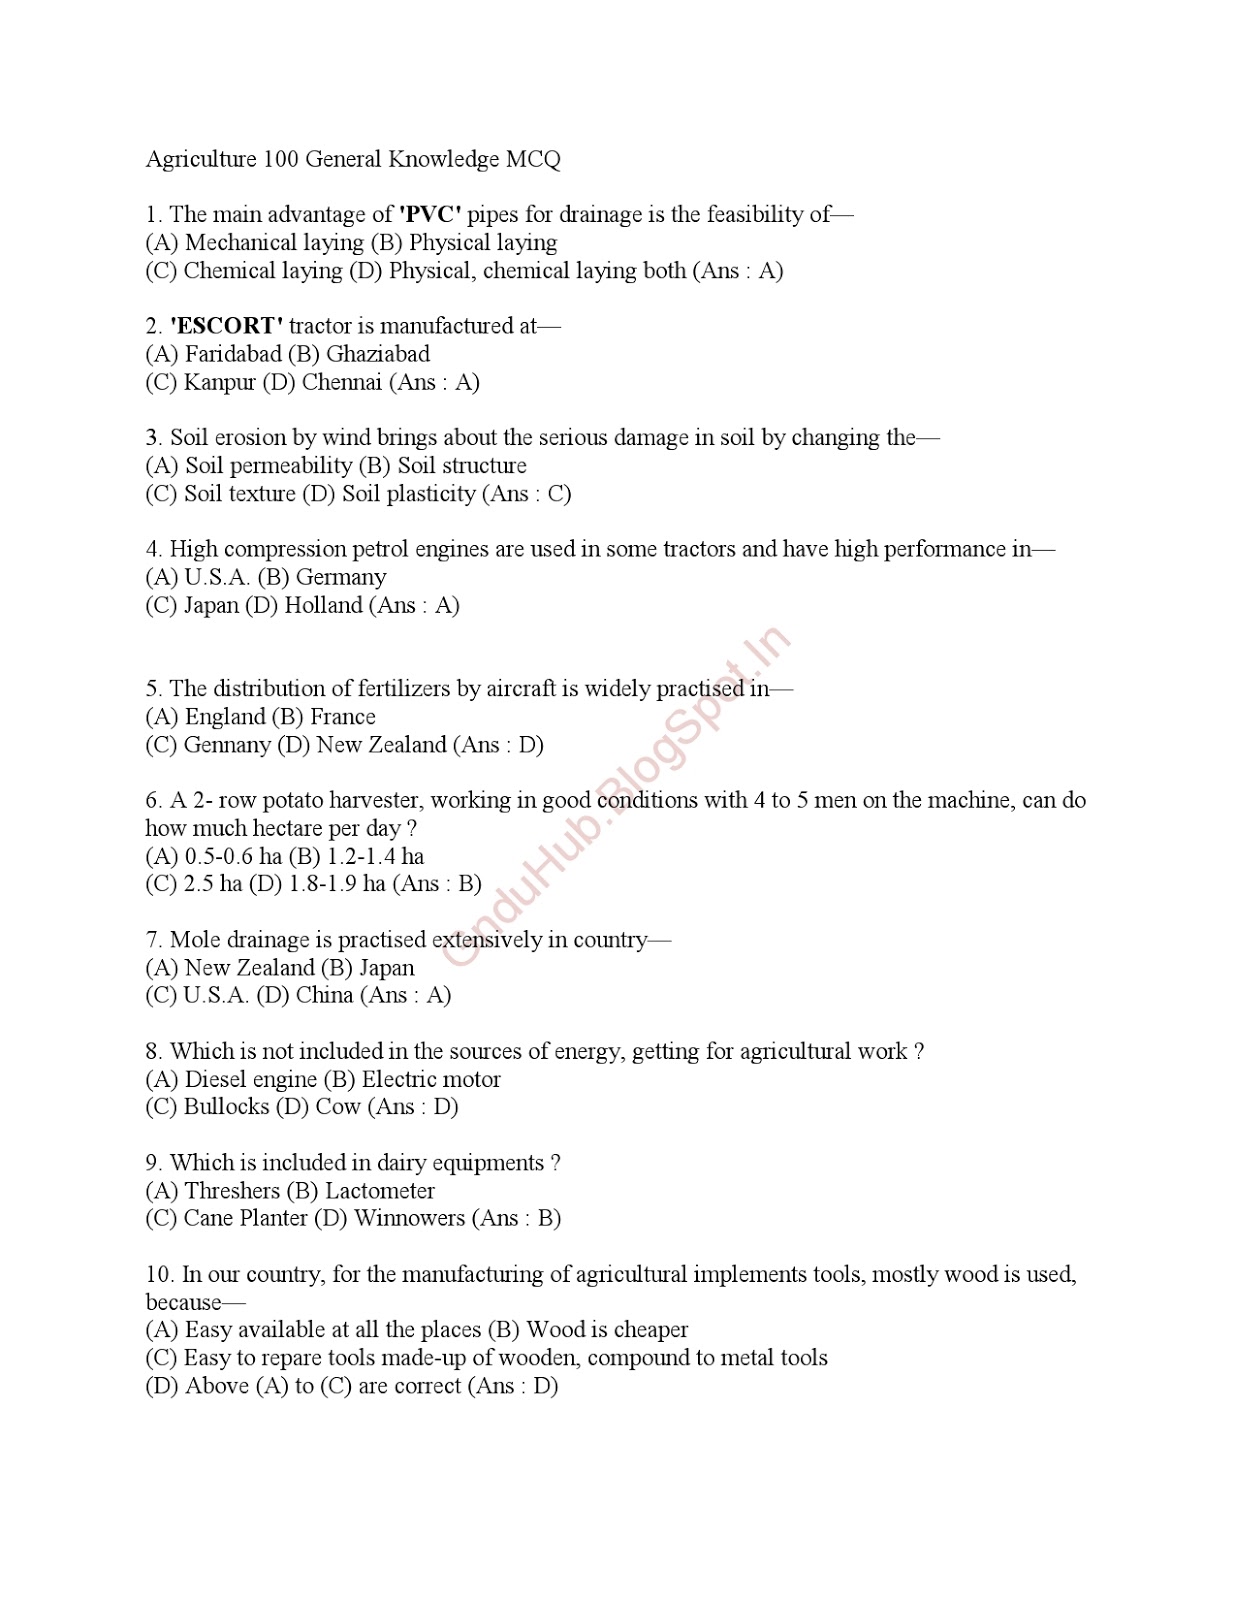 Agriculture 100 General Knowledge Mcq Pdf Next Generation